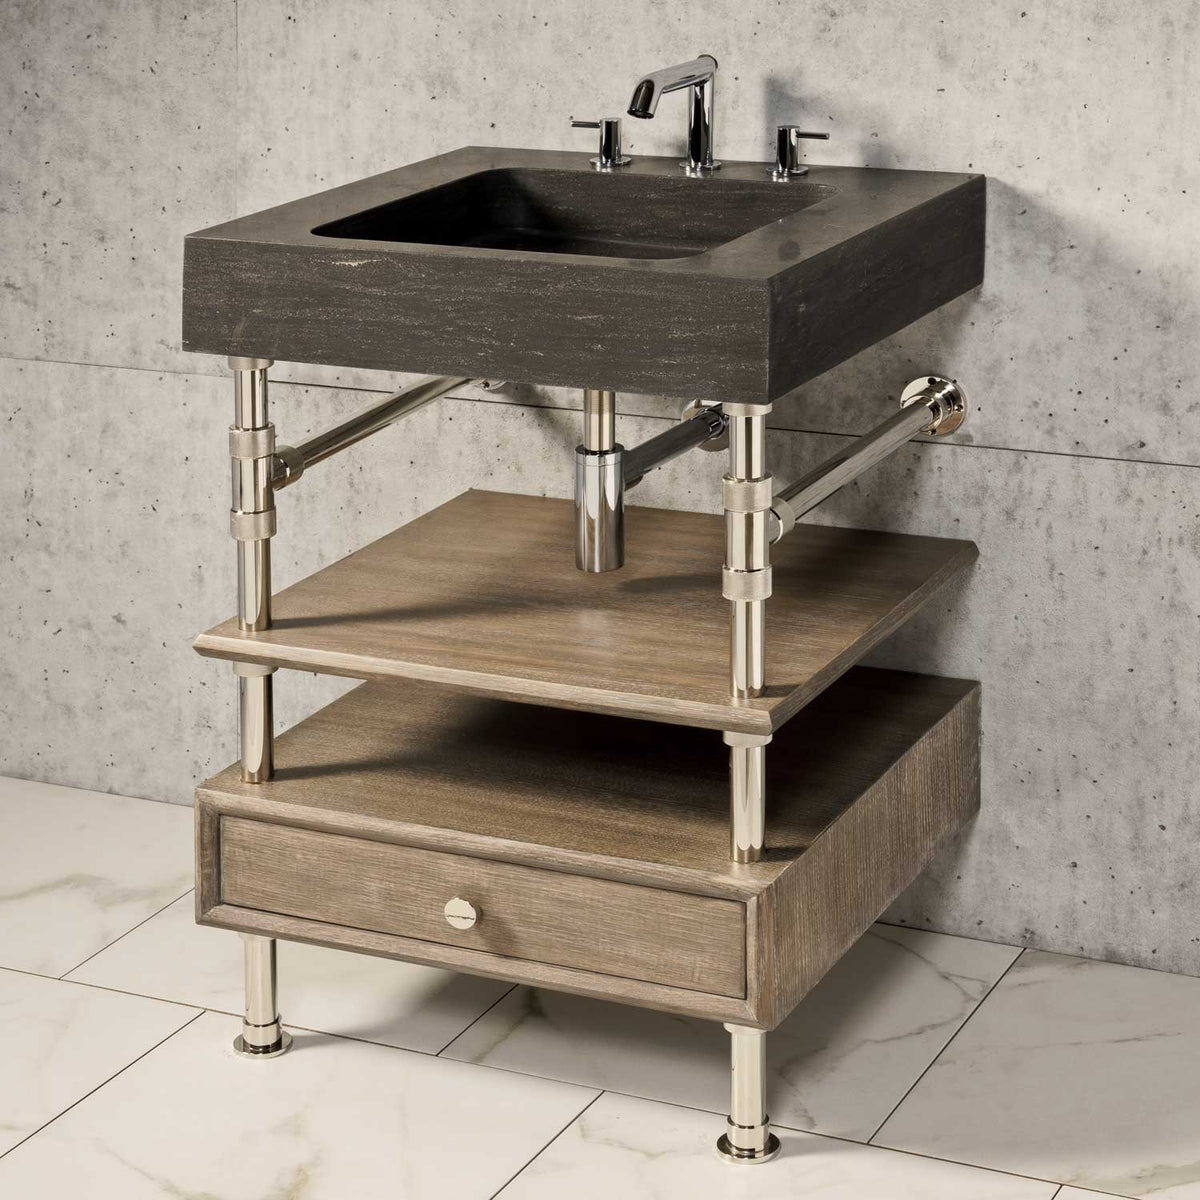 Terra Bath Sink paired with Elemental Classic Console Vanity image 1 of 4